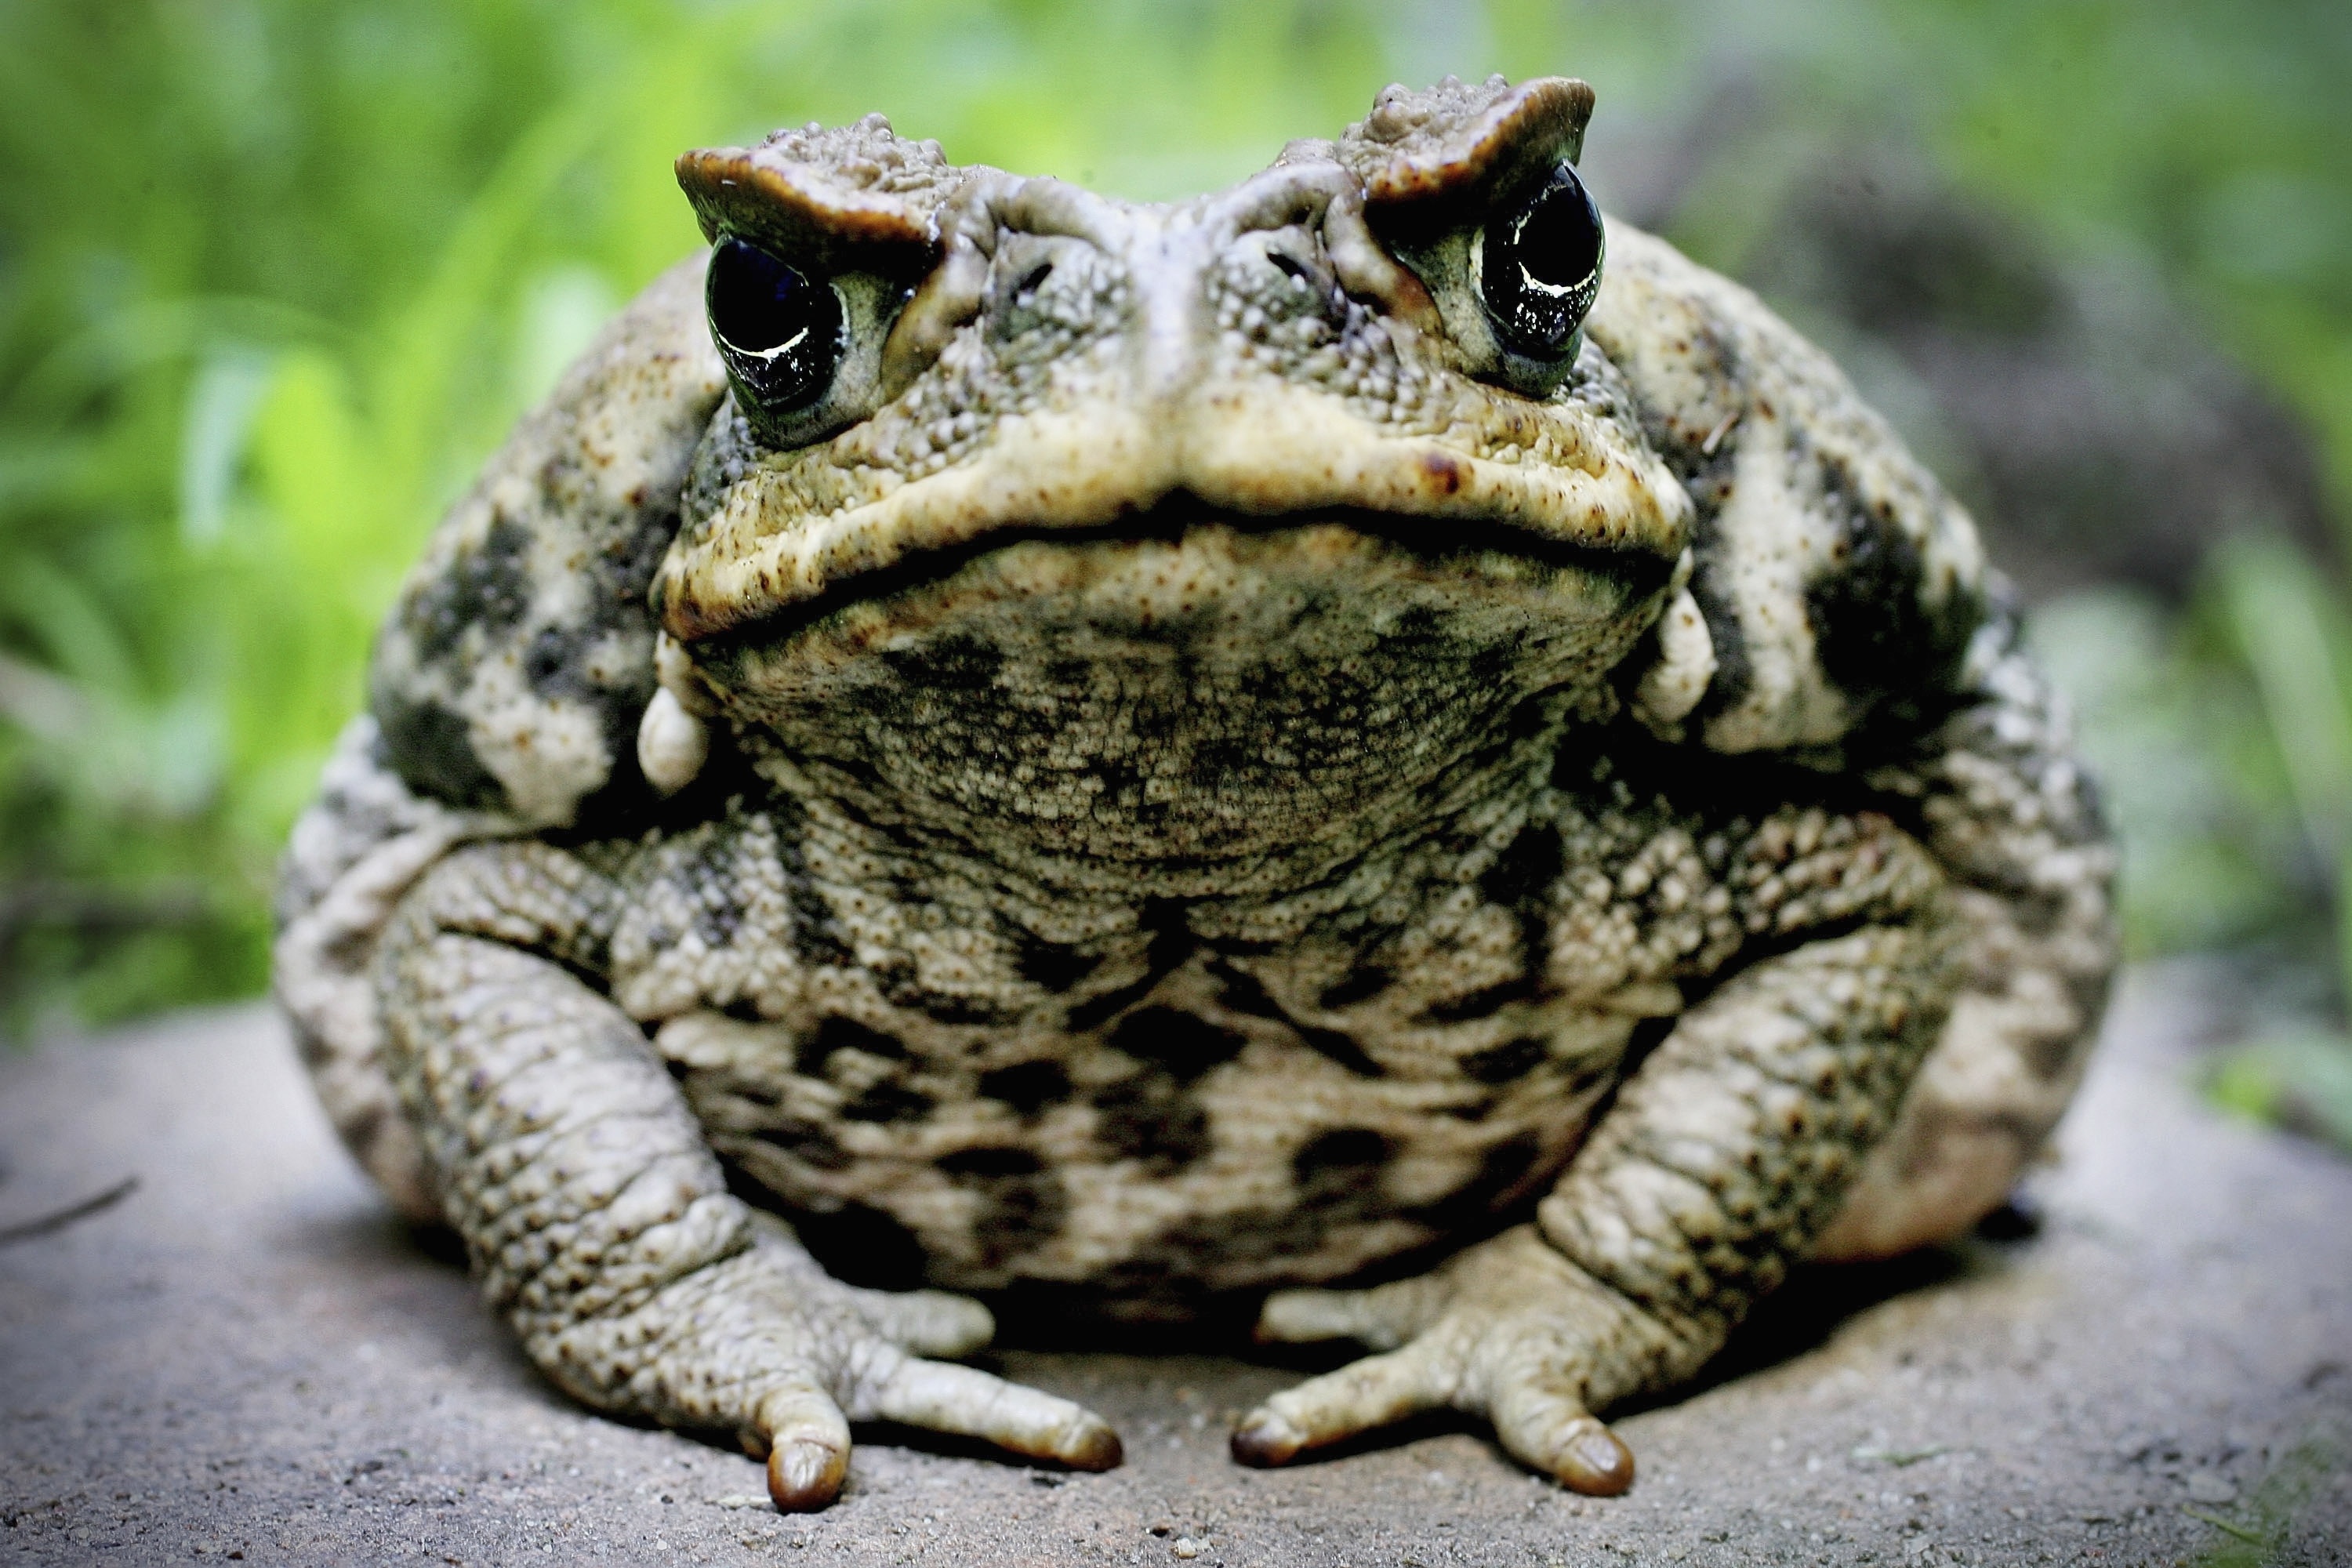 Cane toad wallpapers, Animal kingdom, High-quality images, Nature's spectacle, 3000x2000 HD Desktop